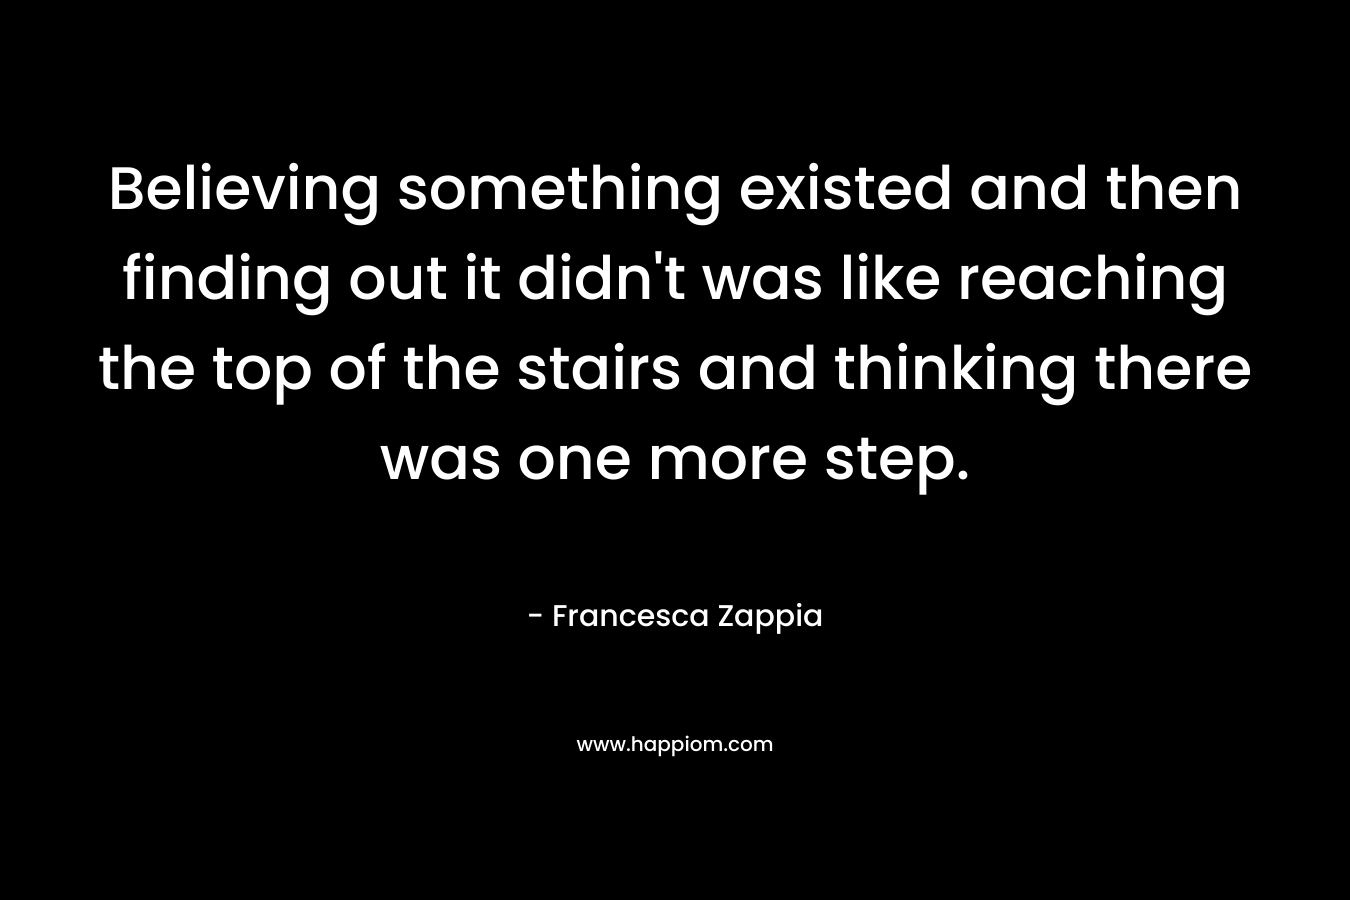 Believing something existed and then finding out it didn't was like reaching the top of the stairs and thinking there was one more step.